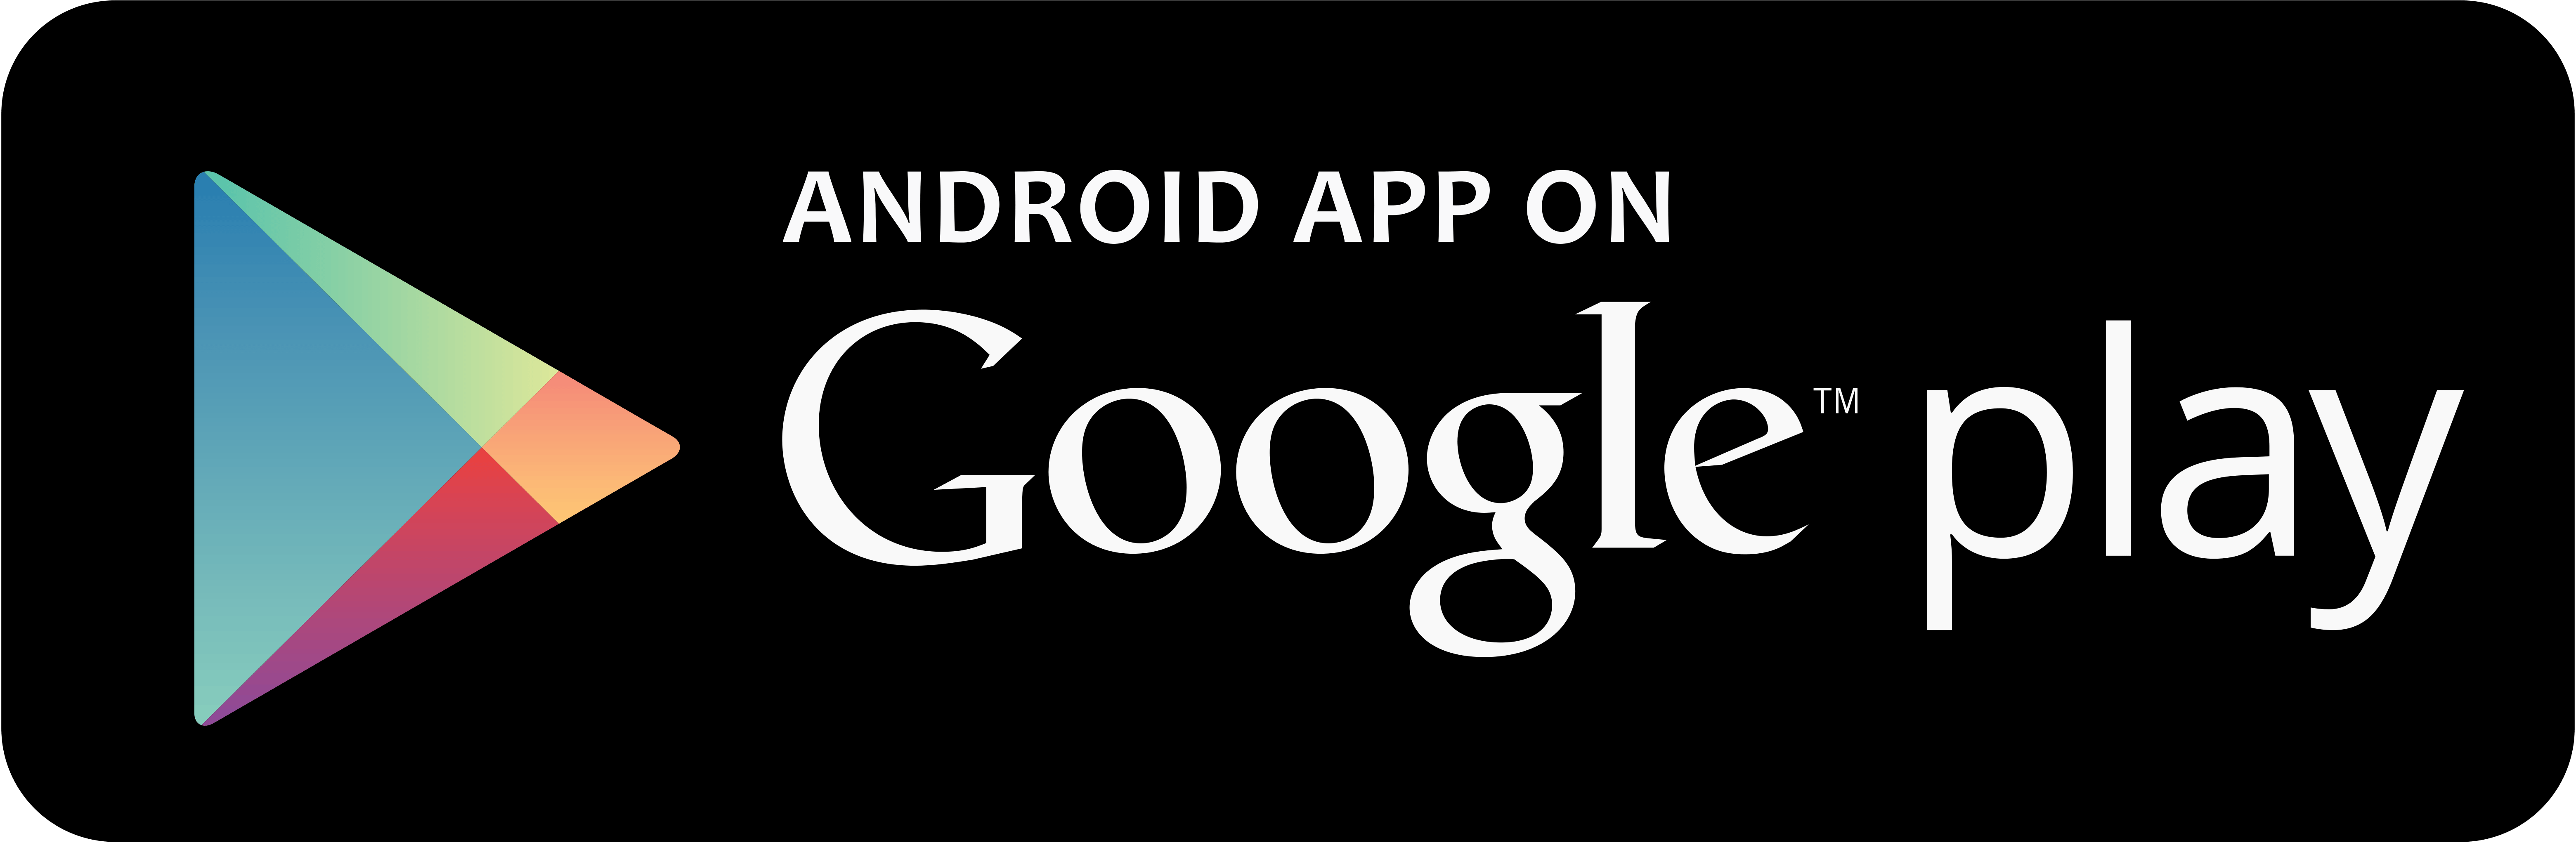 android-app-on-google-play-svg